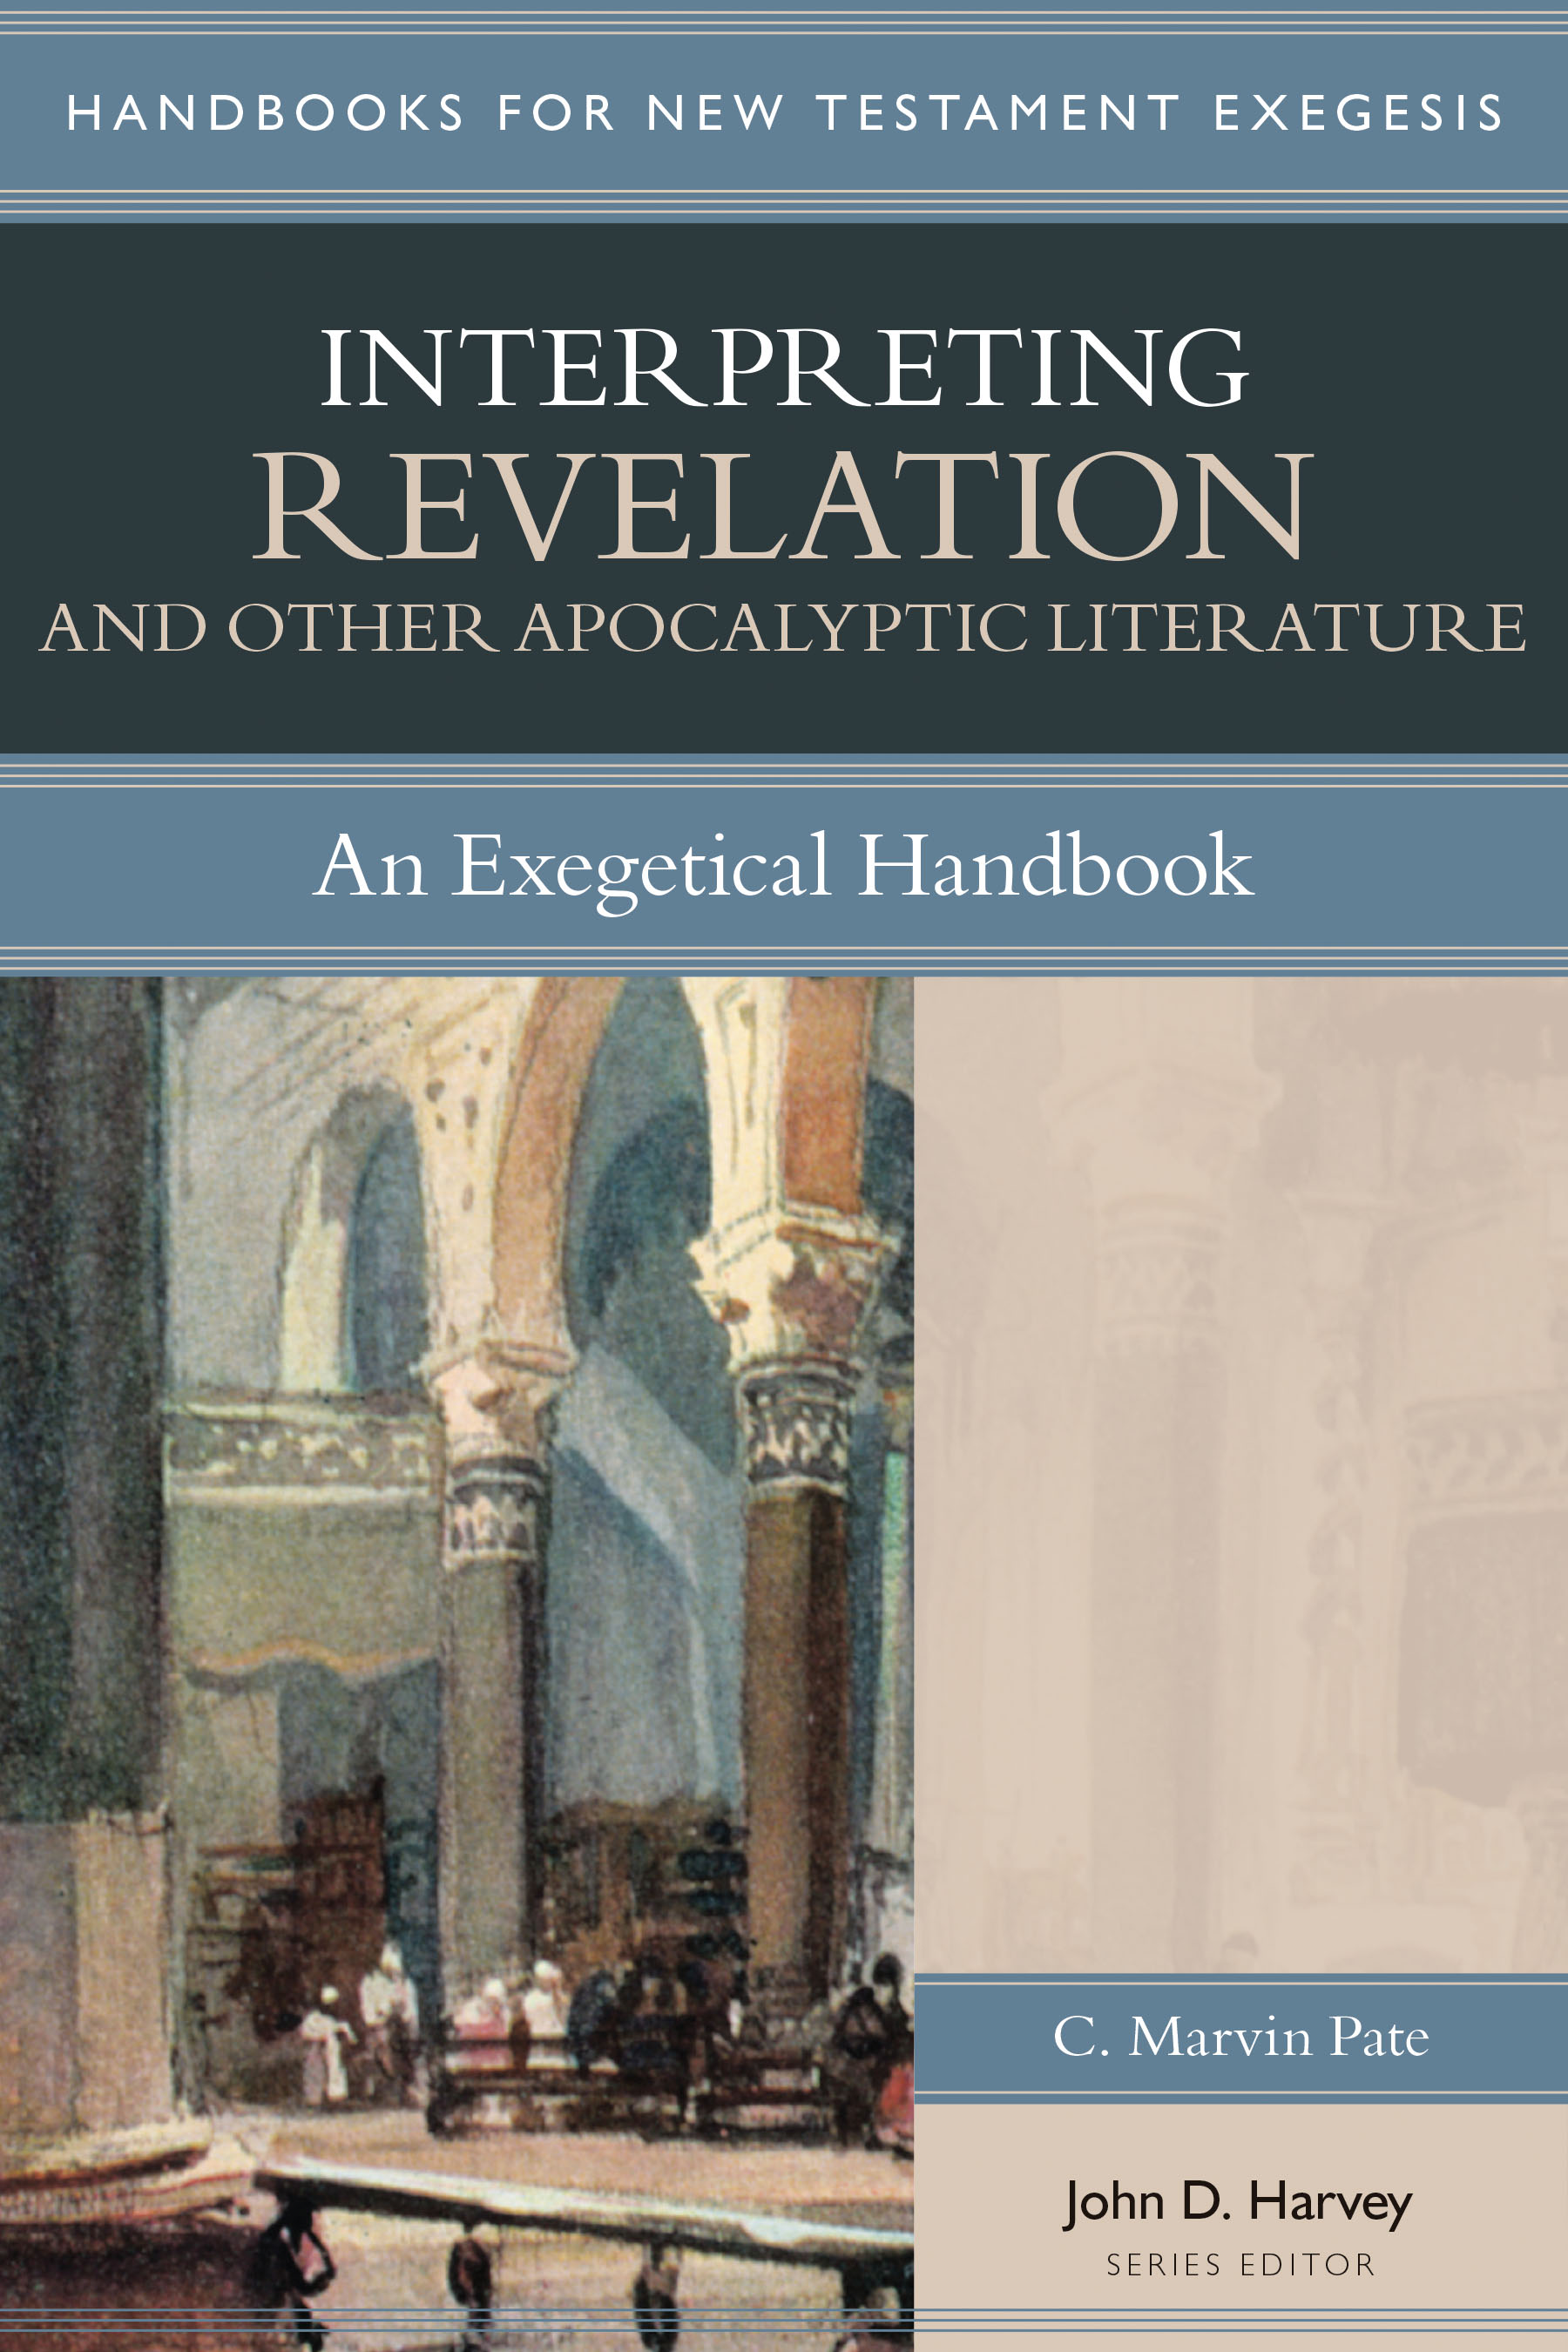 Interpreting Revelation and Other Apocalyptic Literature